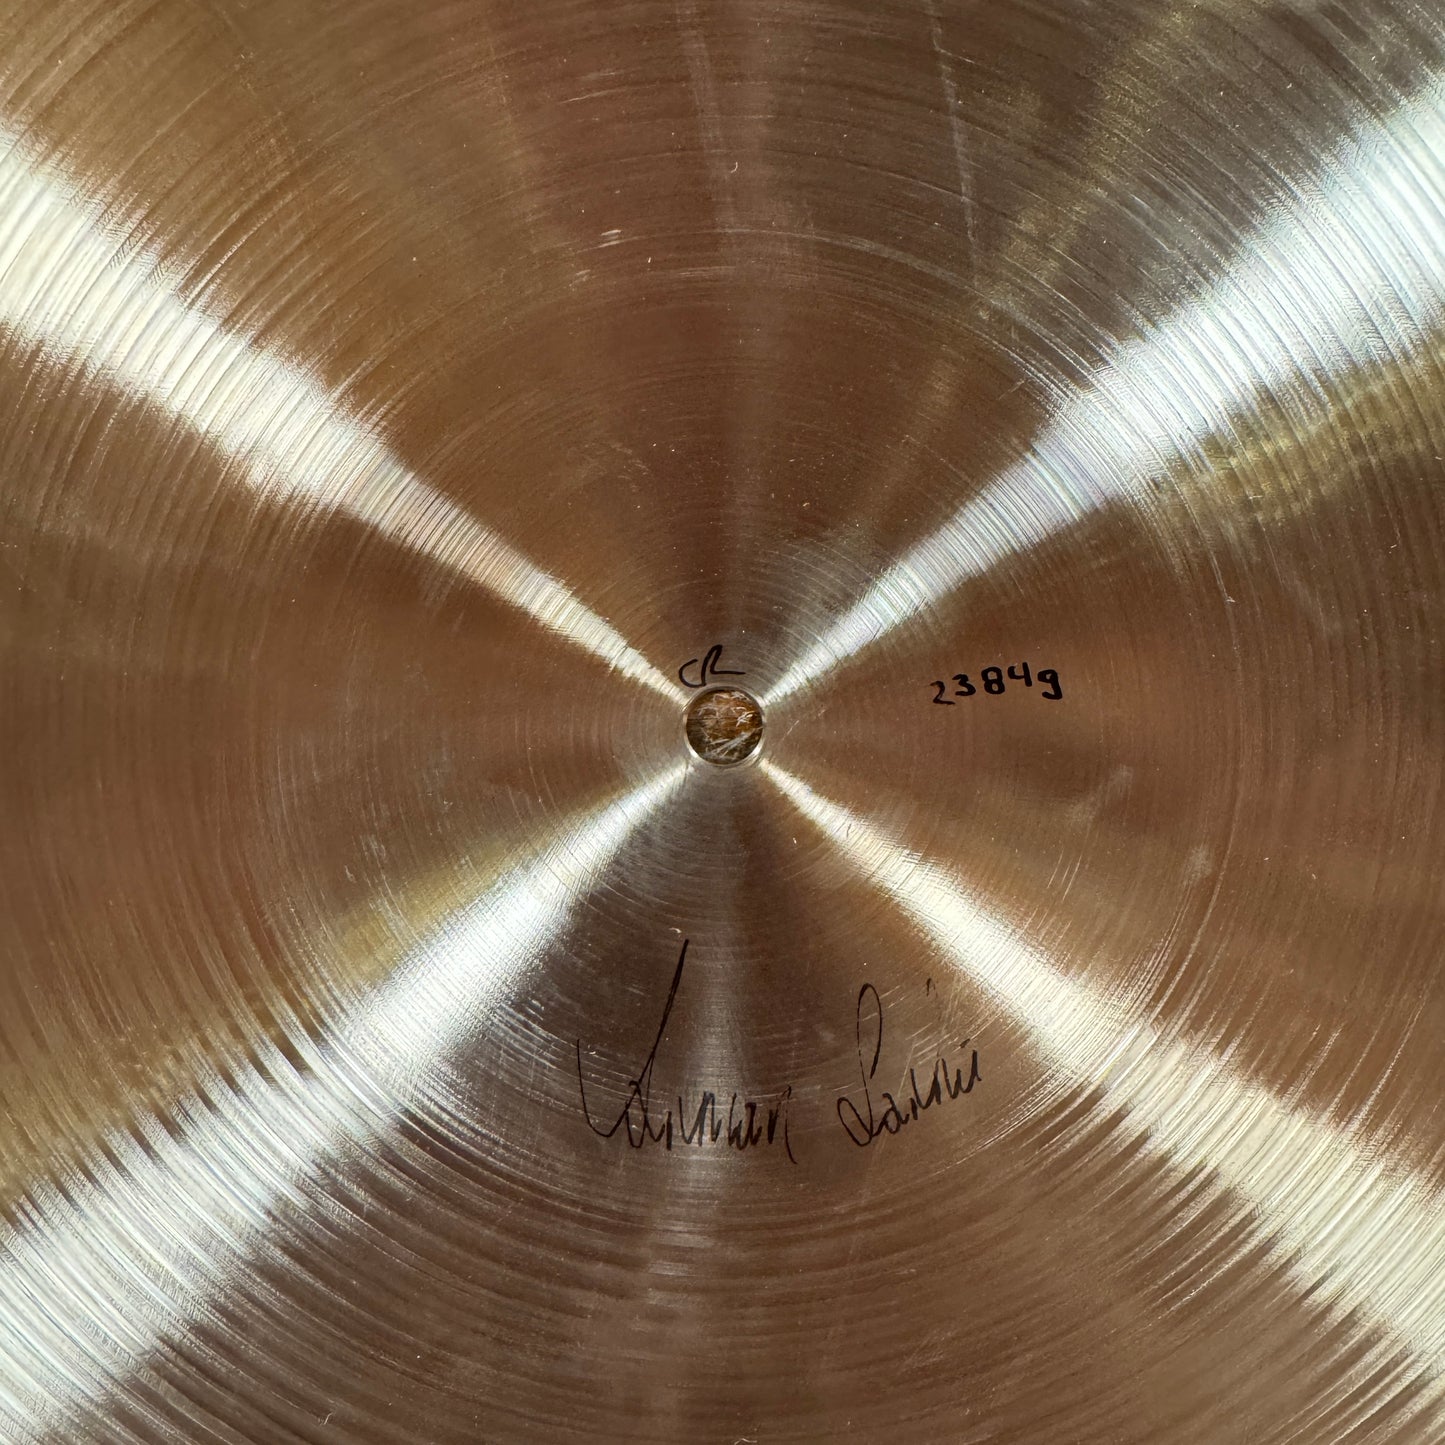 22" Istanbul Agop Traditional Crash Ride Cymbal 2384g *Video Demo*